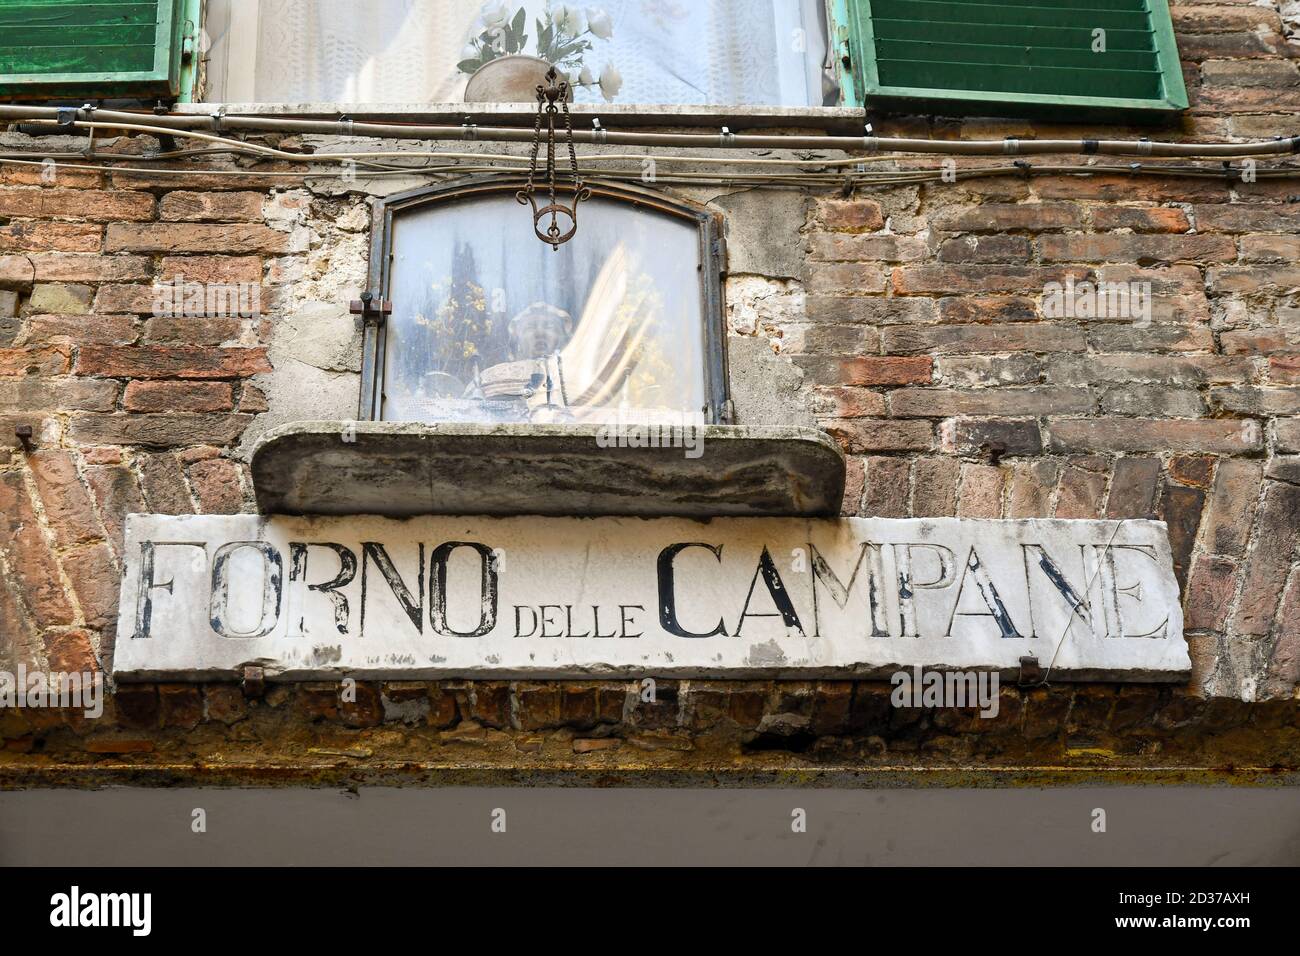 Sign of the historical bakery "Forno delle Campane", opened in the 1930s in  the centre of Siena, Tuscany, Italy Stock Photo - Alamy